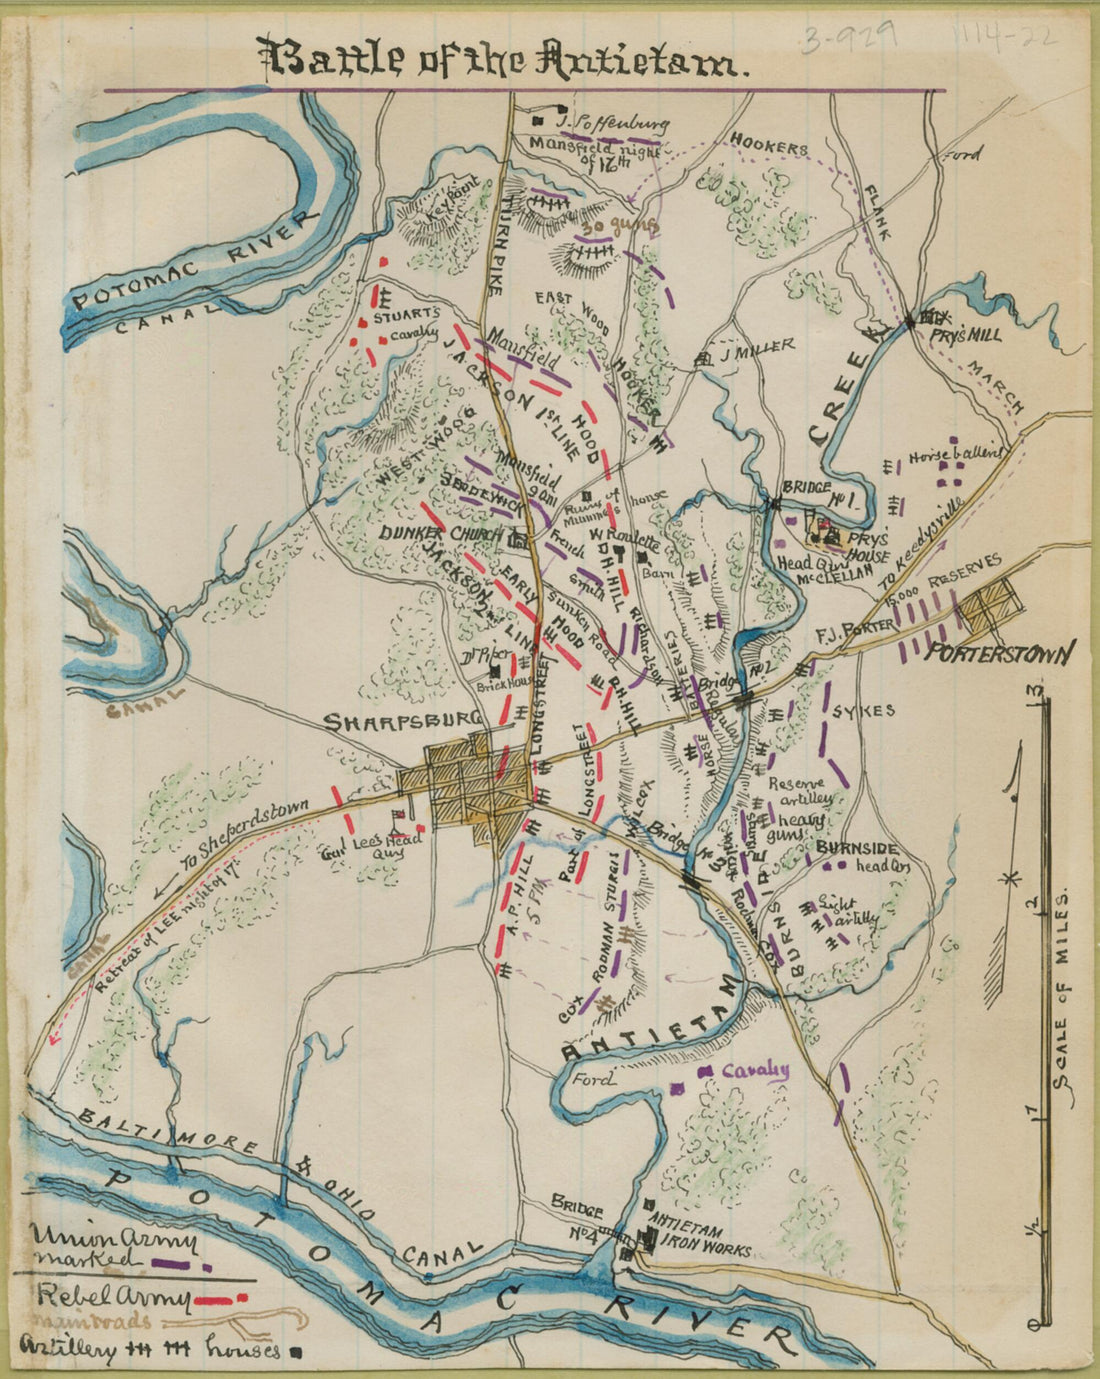 This old map of Battle of the Antietam from 09-17 was created by Robert Knox Sneden in 09-17